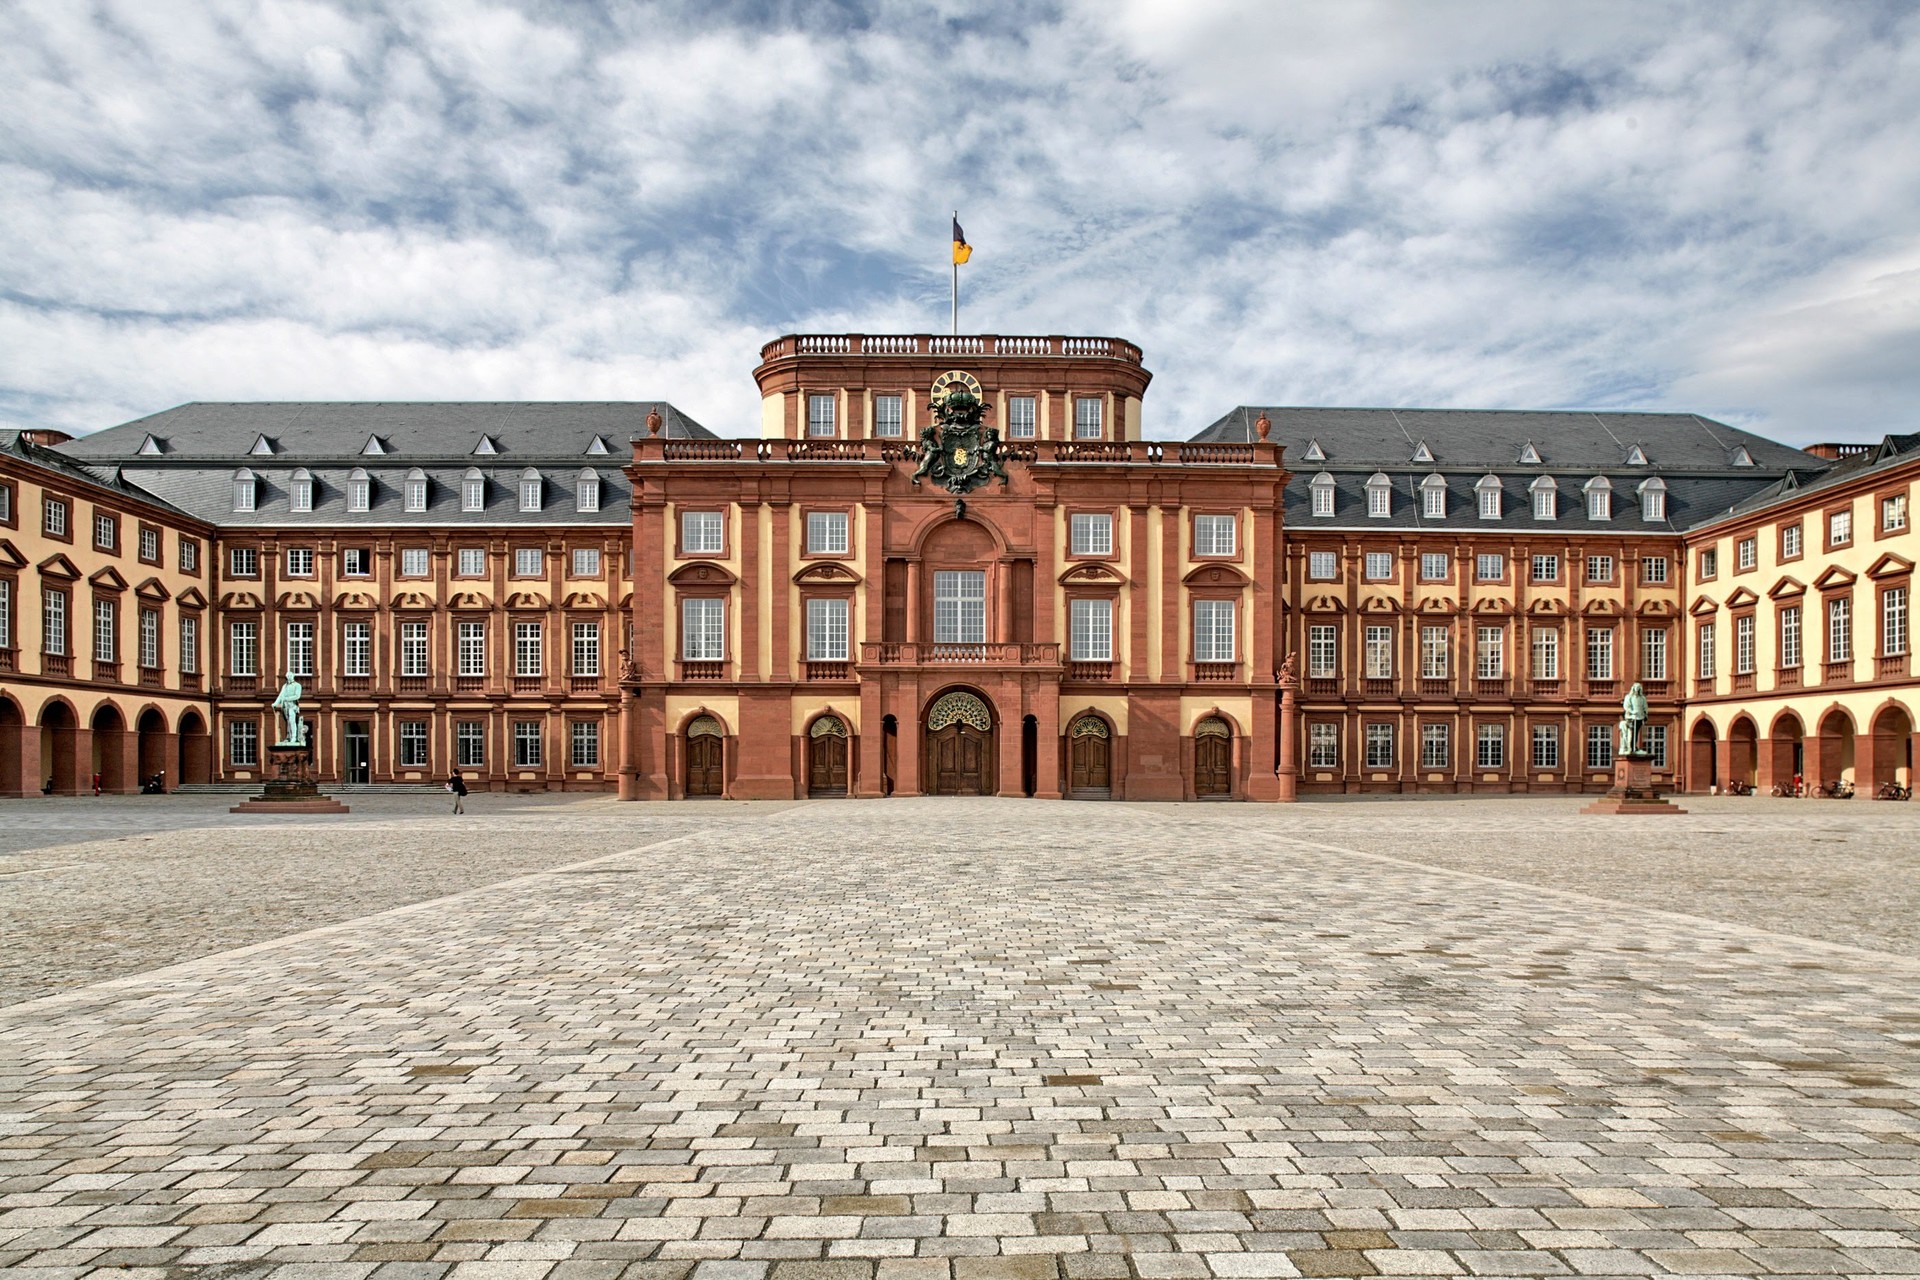 The palace of the Elector of the Palatinate at Mannheim, where its resident orchestra was the heart of the "Mannheim School".